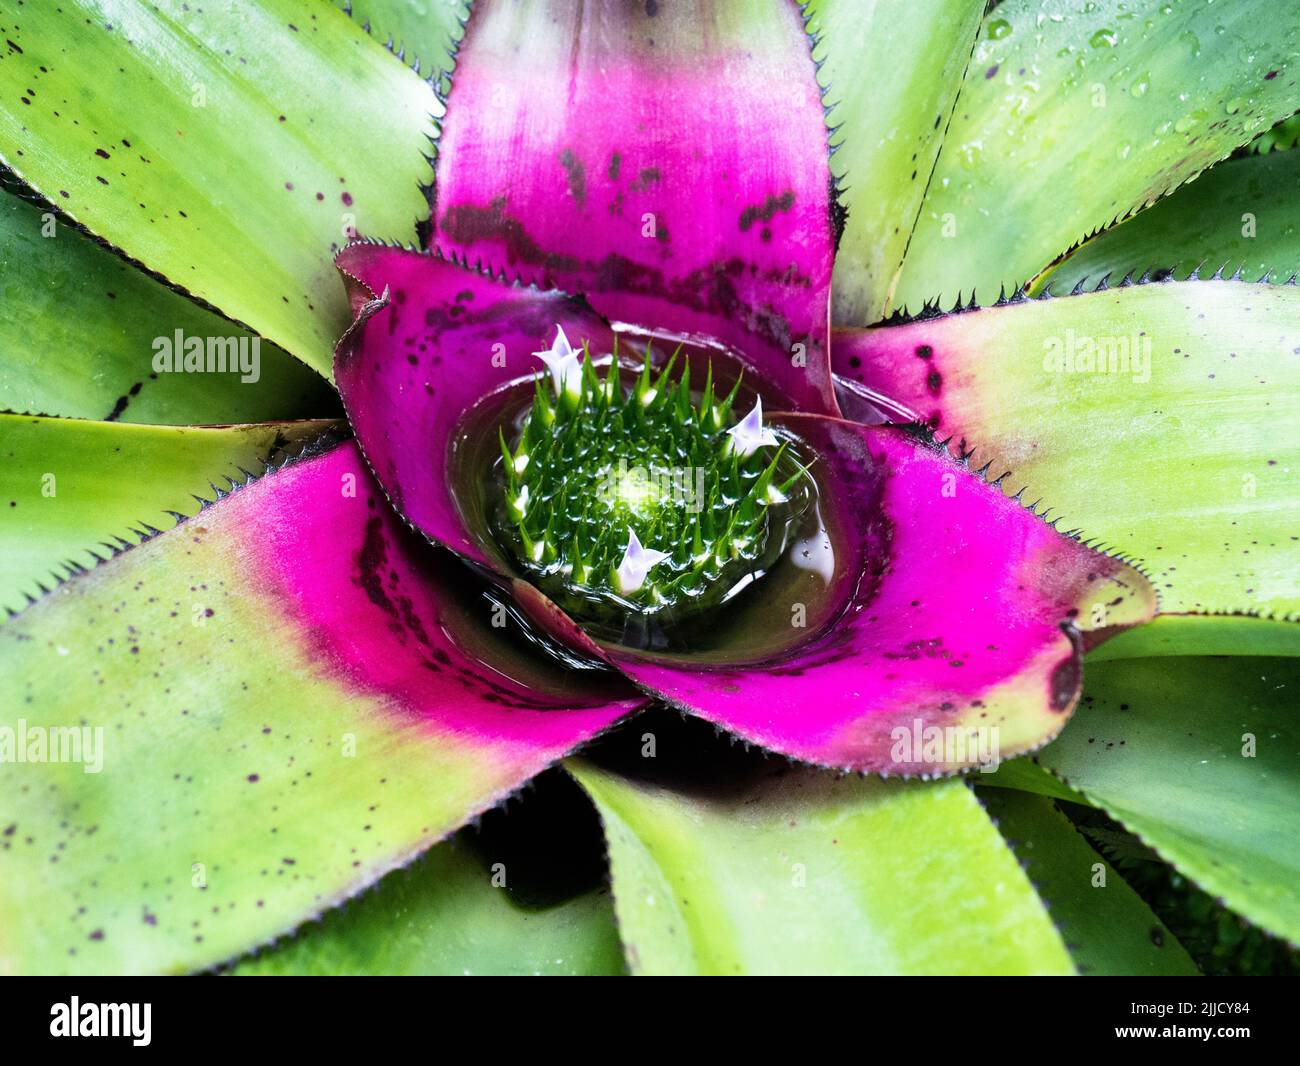 A closeup of an exotic green and purple plant Neoregelia concentrica with water droplets on its leaves Stock Photo